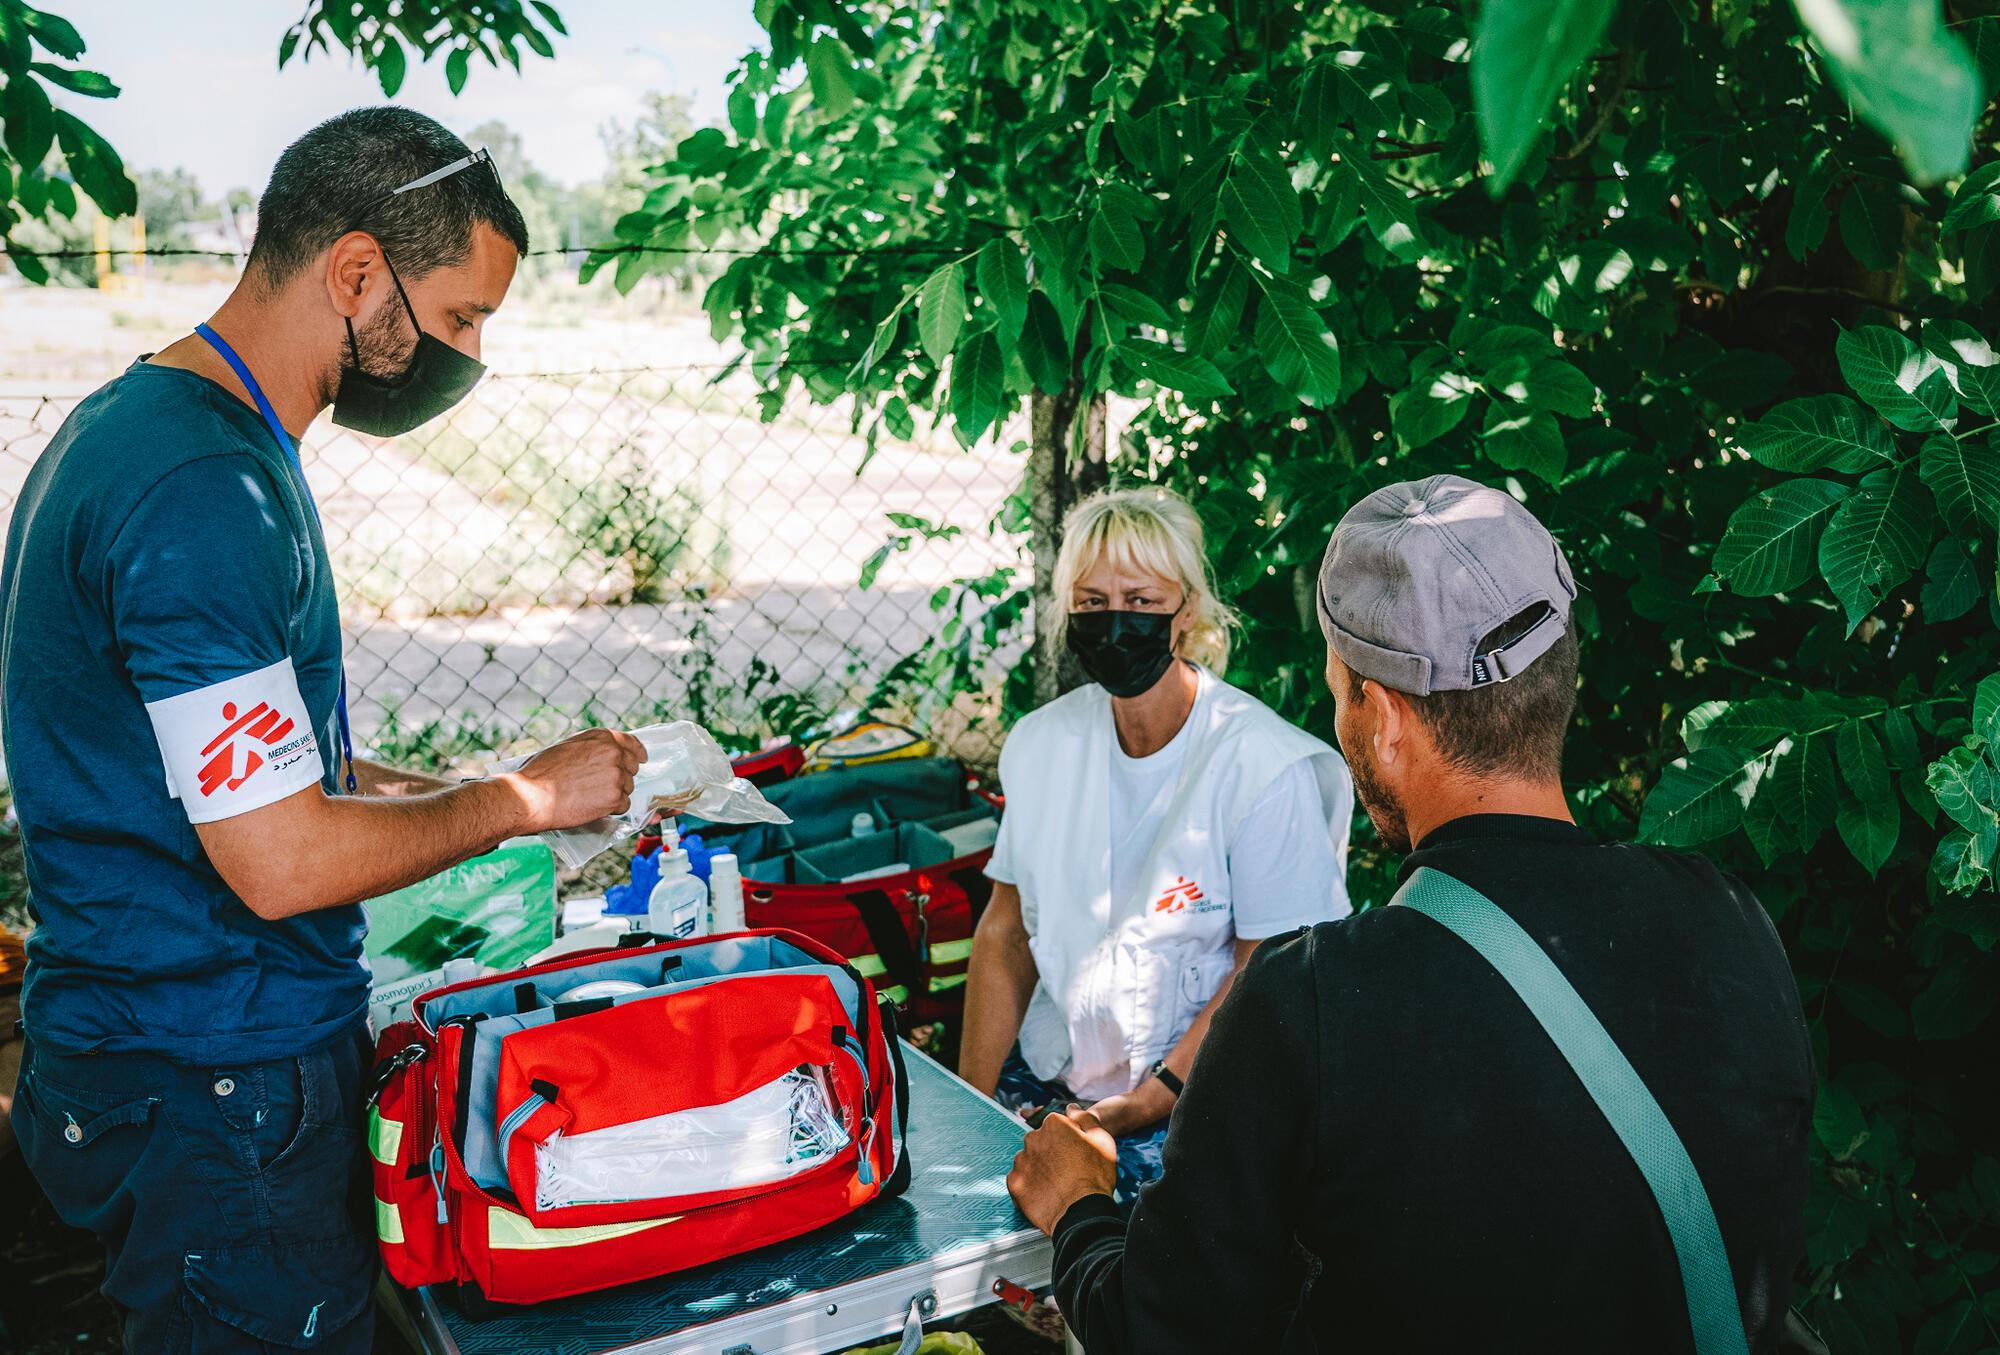 An MSF cultural mediator along with a nurse explain to a patient how to use a wound kit during a medical consultation of the MSF mobile clinic in Horgos 2 border crossing area in Serbia. 